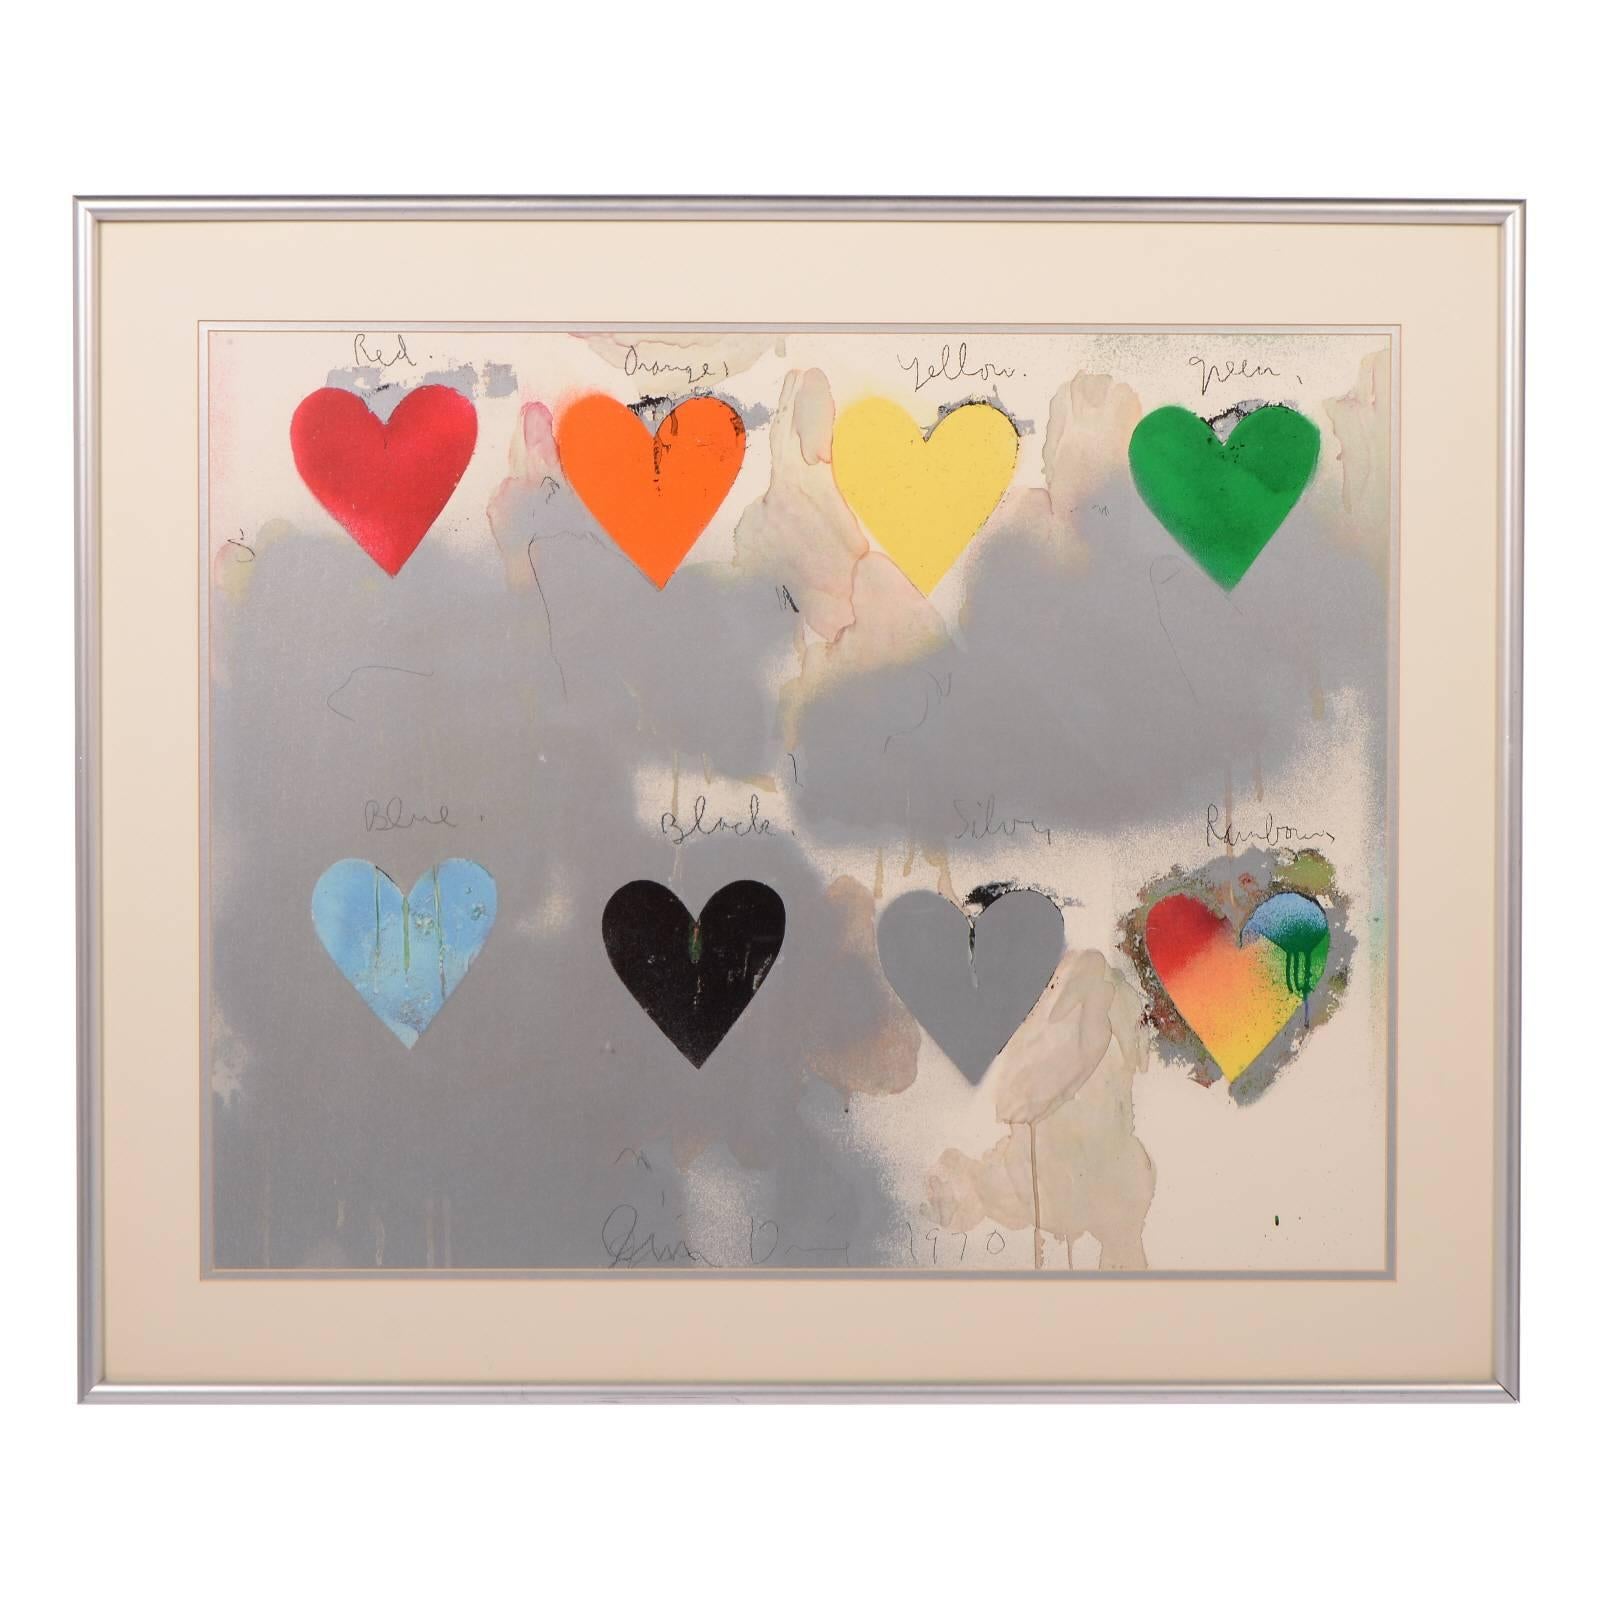 (after) Jim Dine Figurative Print - 8 Eight Hearts Lithograph